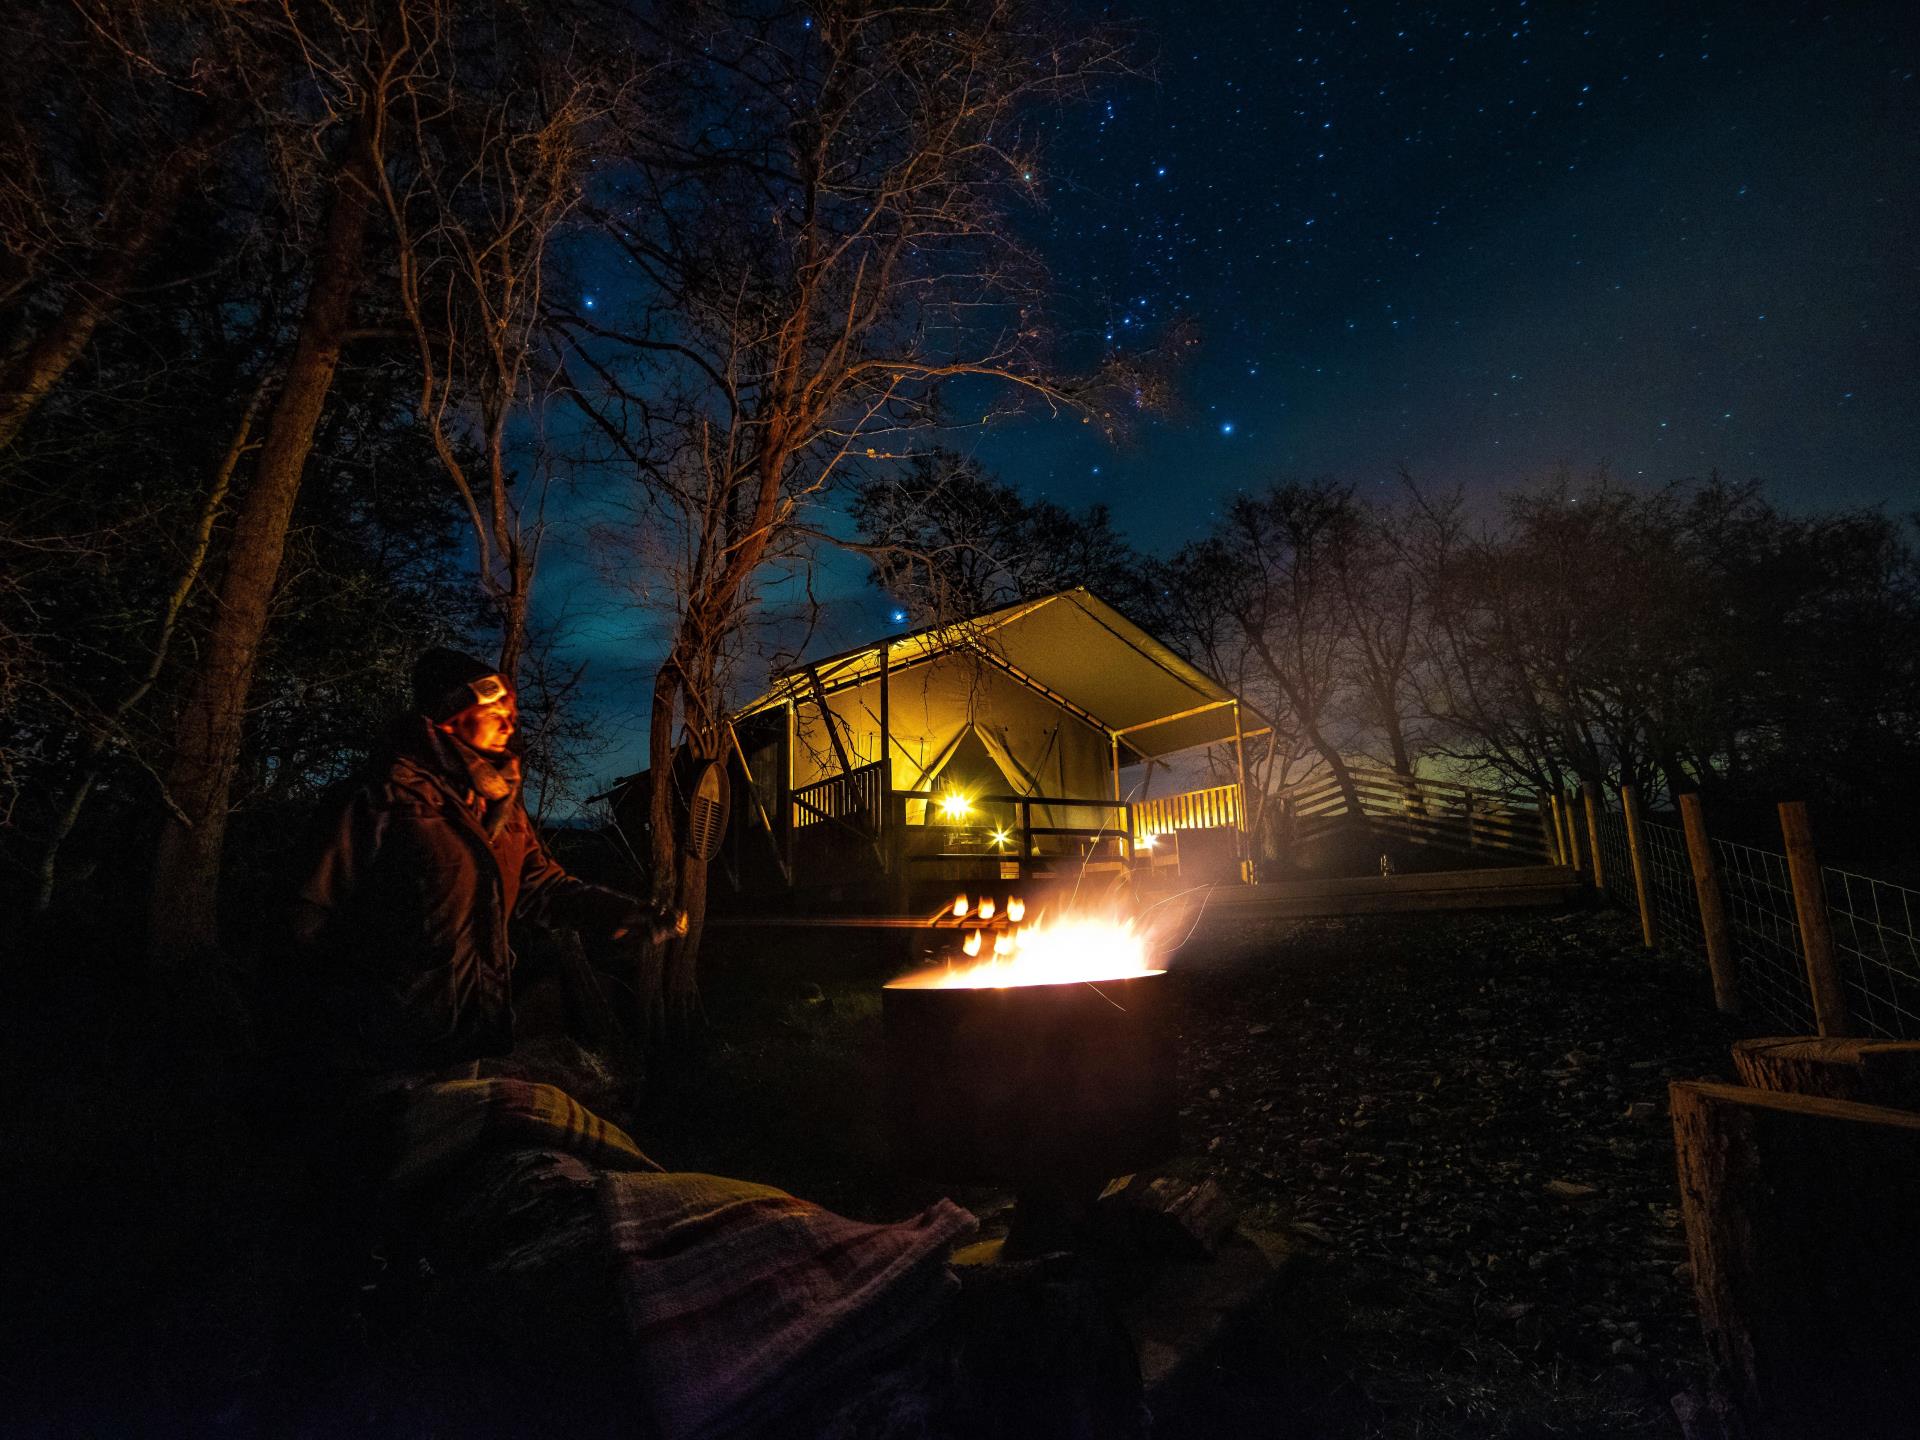 The Fire pit and pizza oven under starry skies